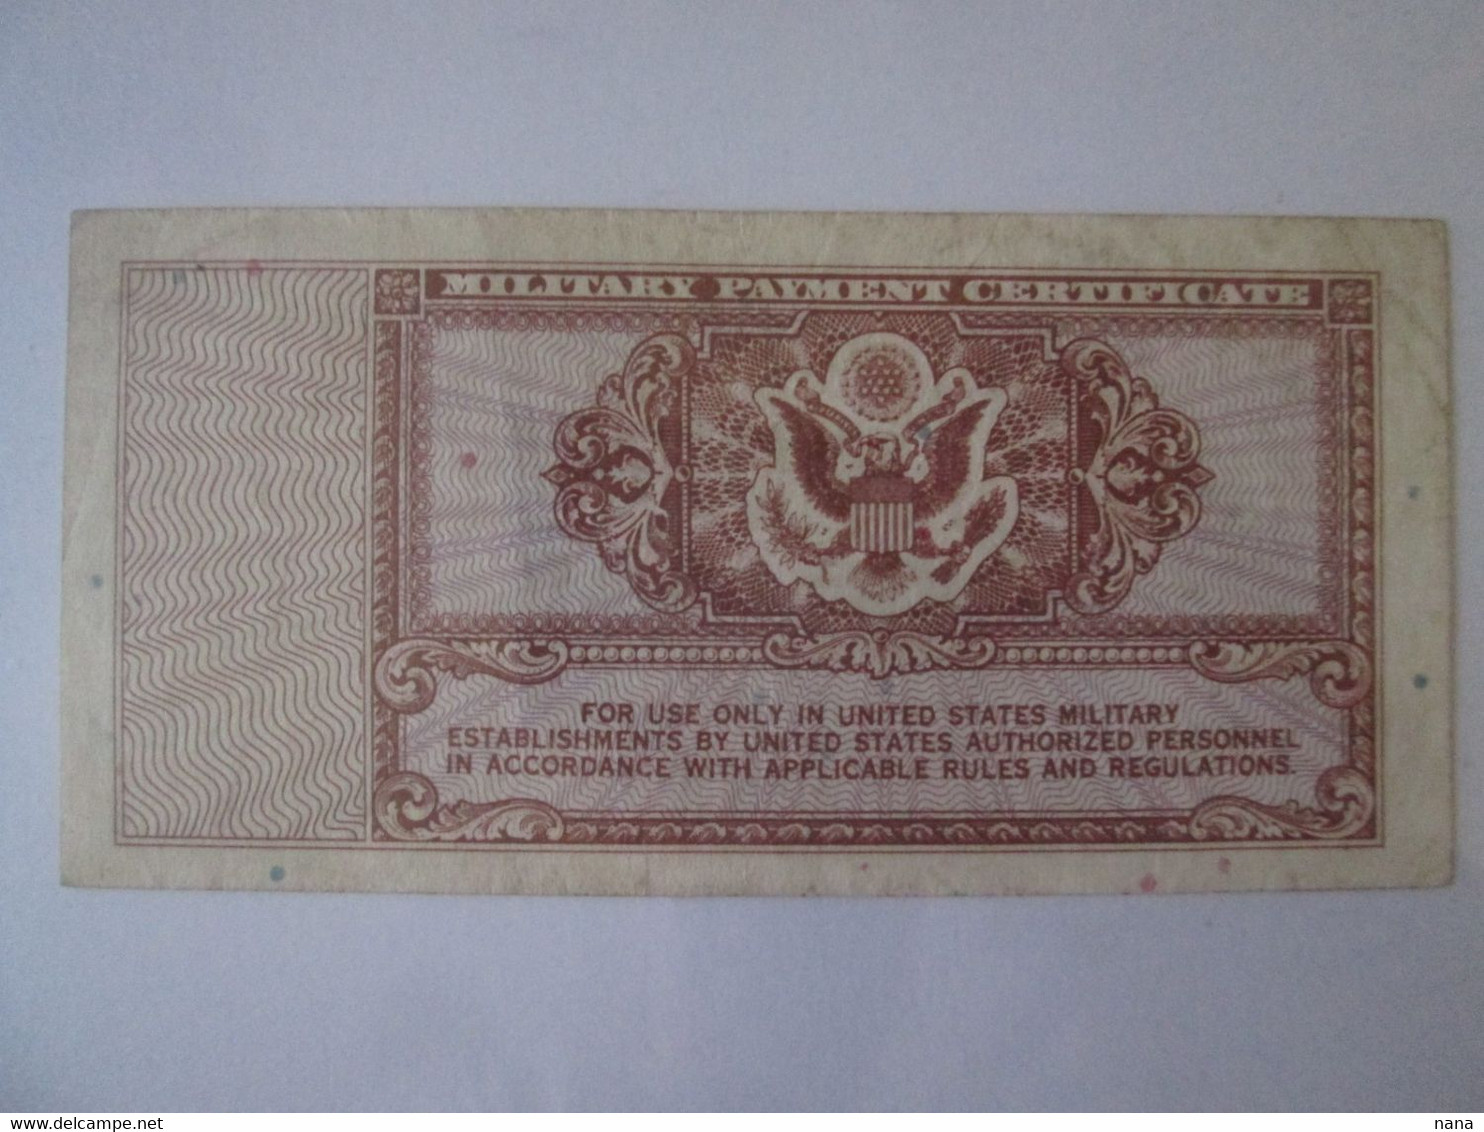 United States 5 Cents 1948-1951 Military Payment Certificate Banknote,see Pictures - 1948-1951 - Reeksen 472